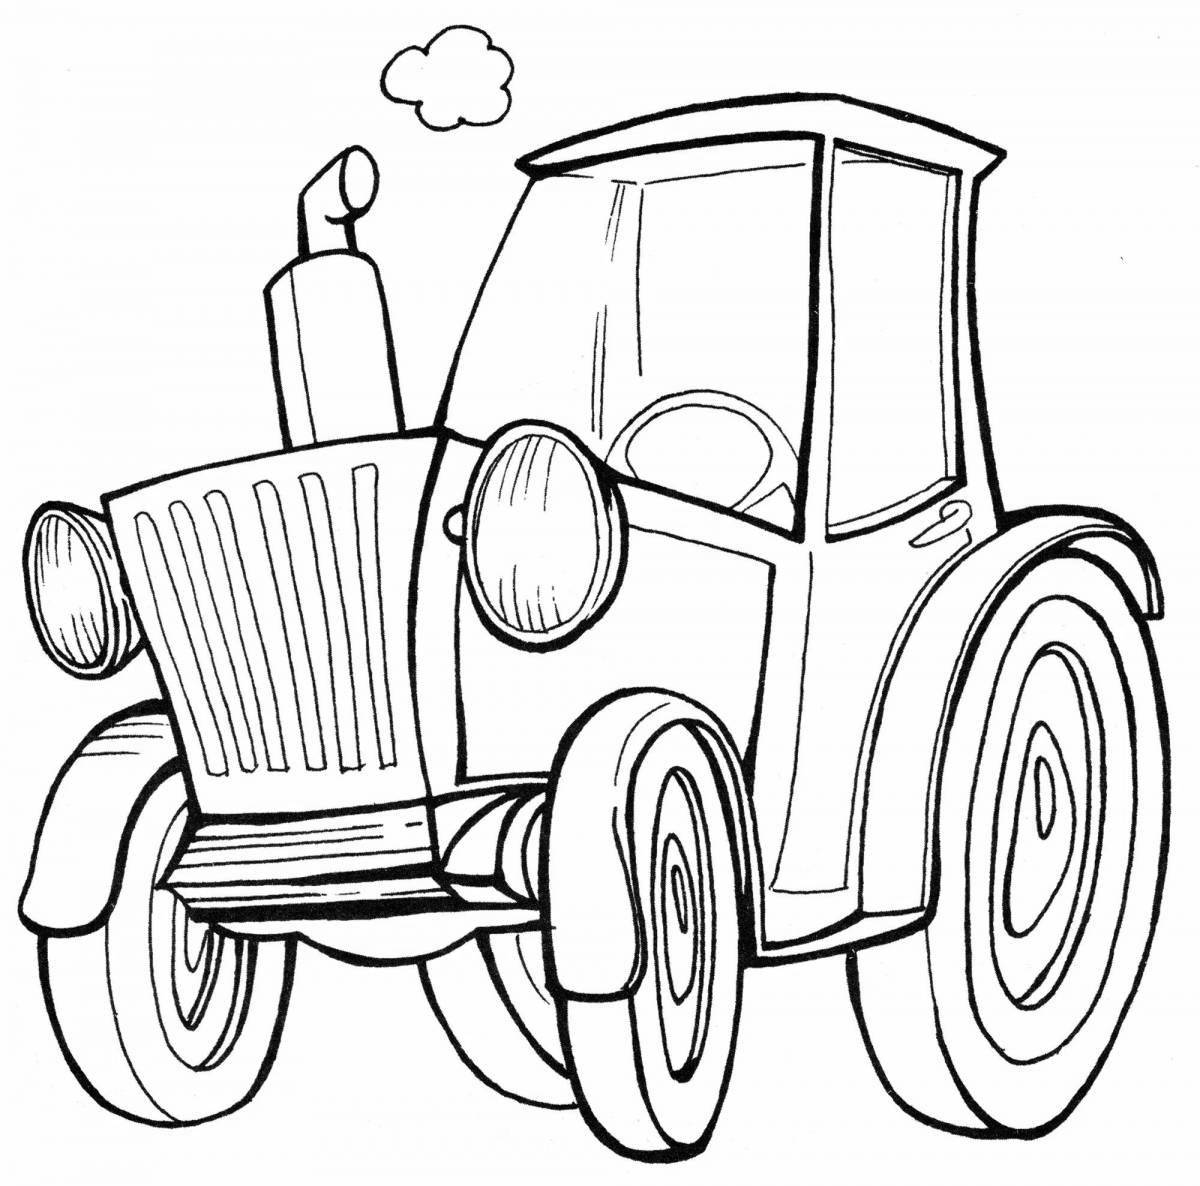 Fantastic blue tractor coloring page